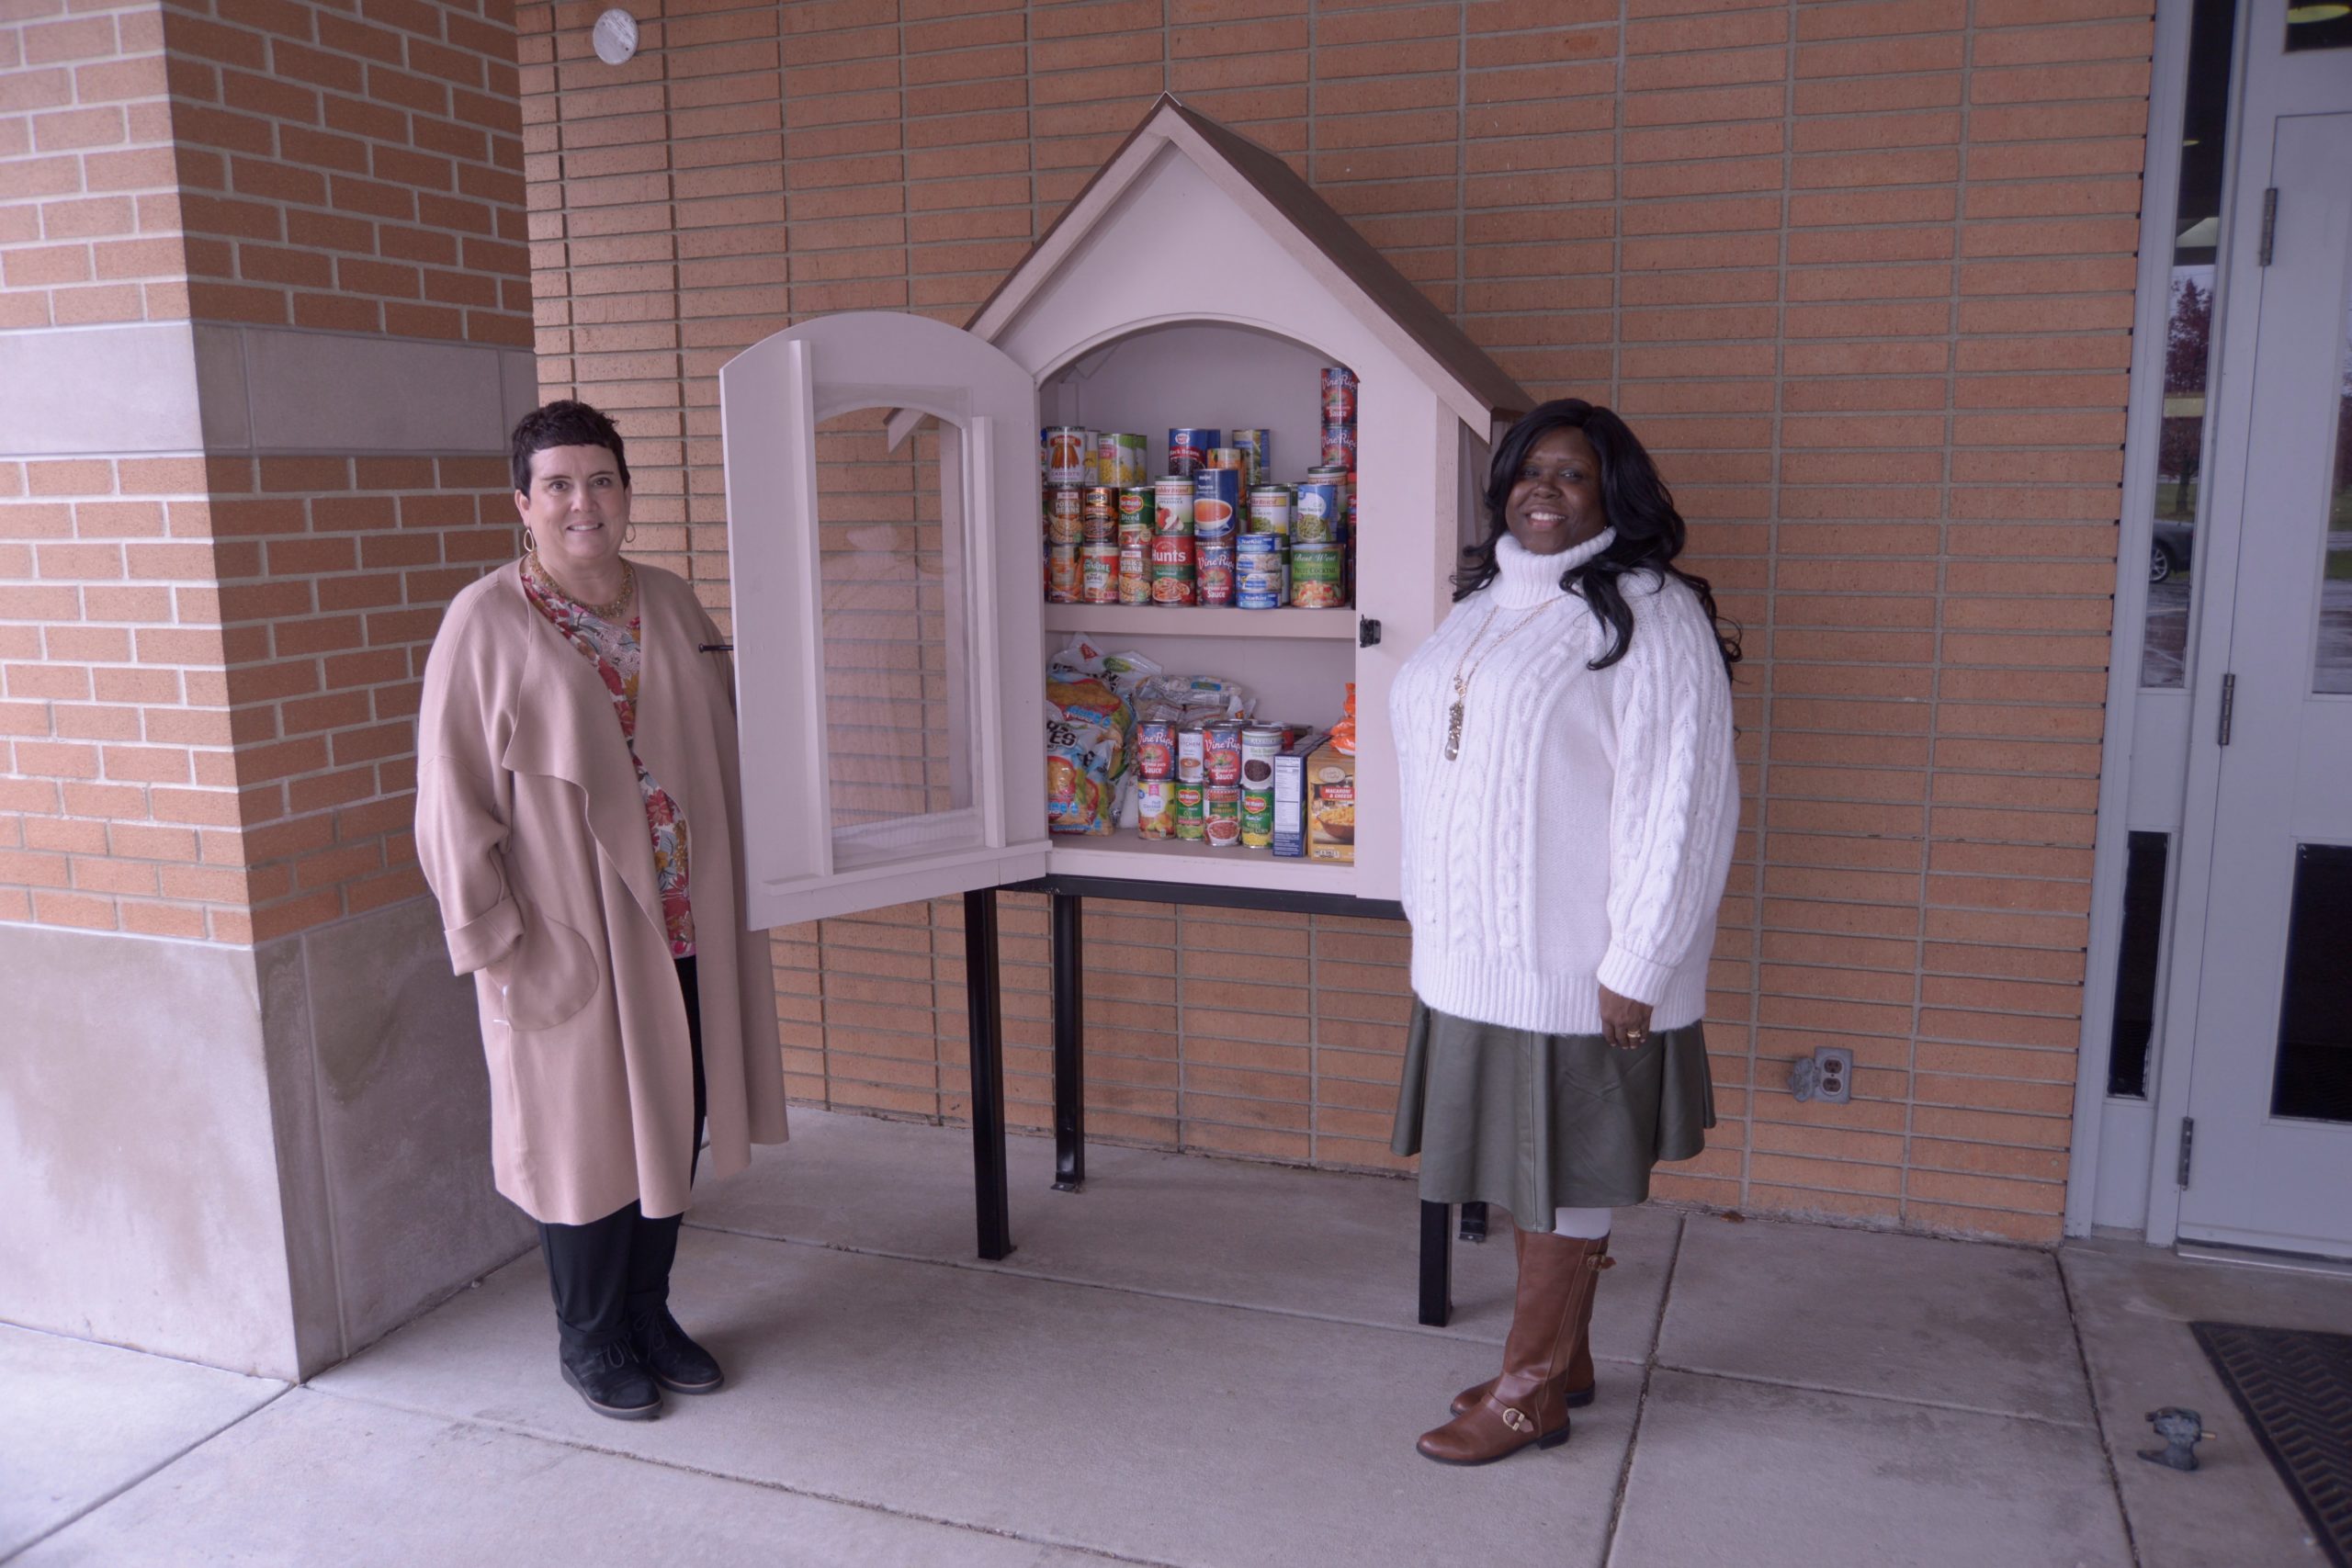 Chapelwood Elementary and Community Partners Create “Blessing Box” to Address Hunger